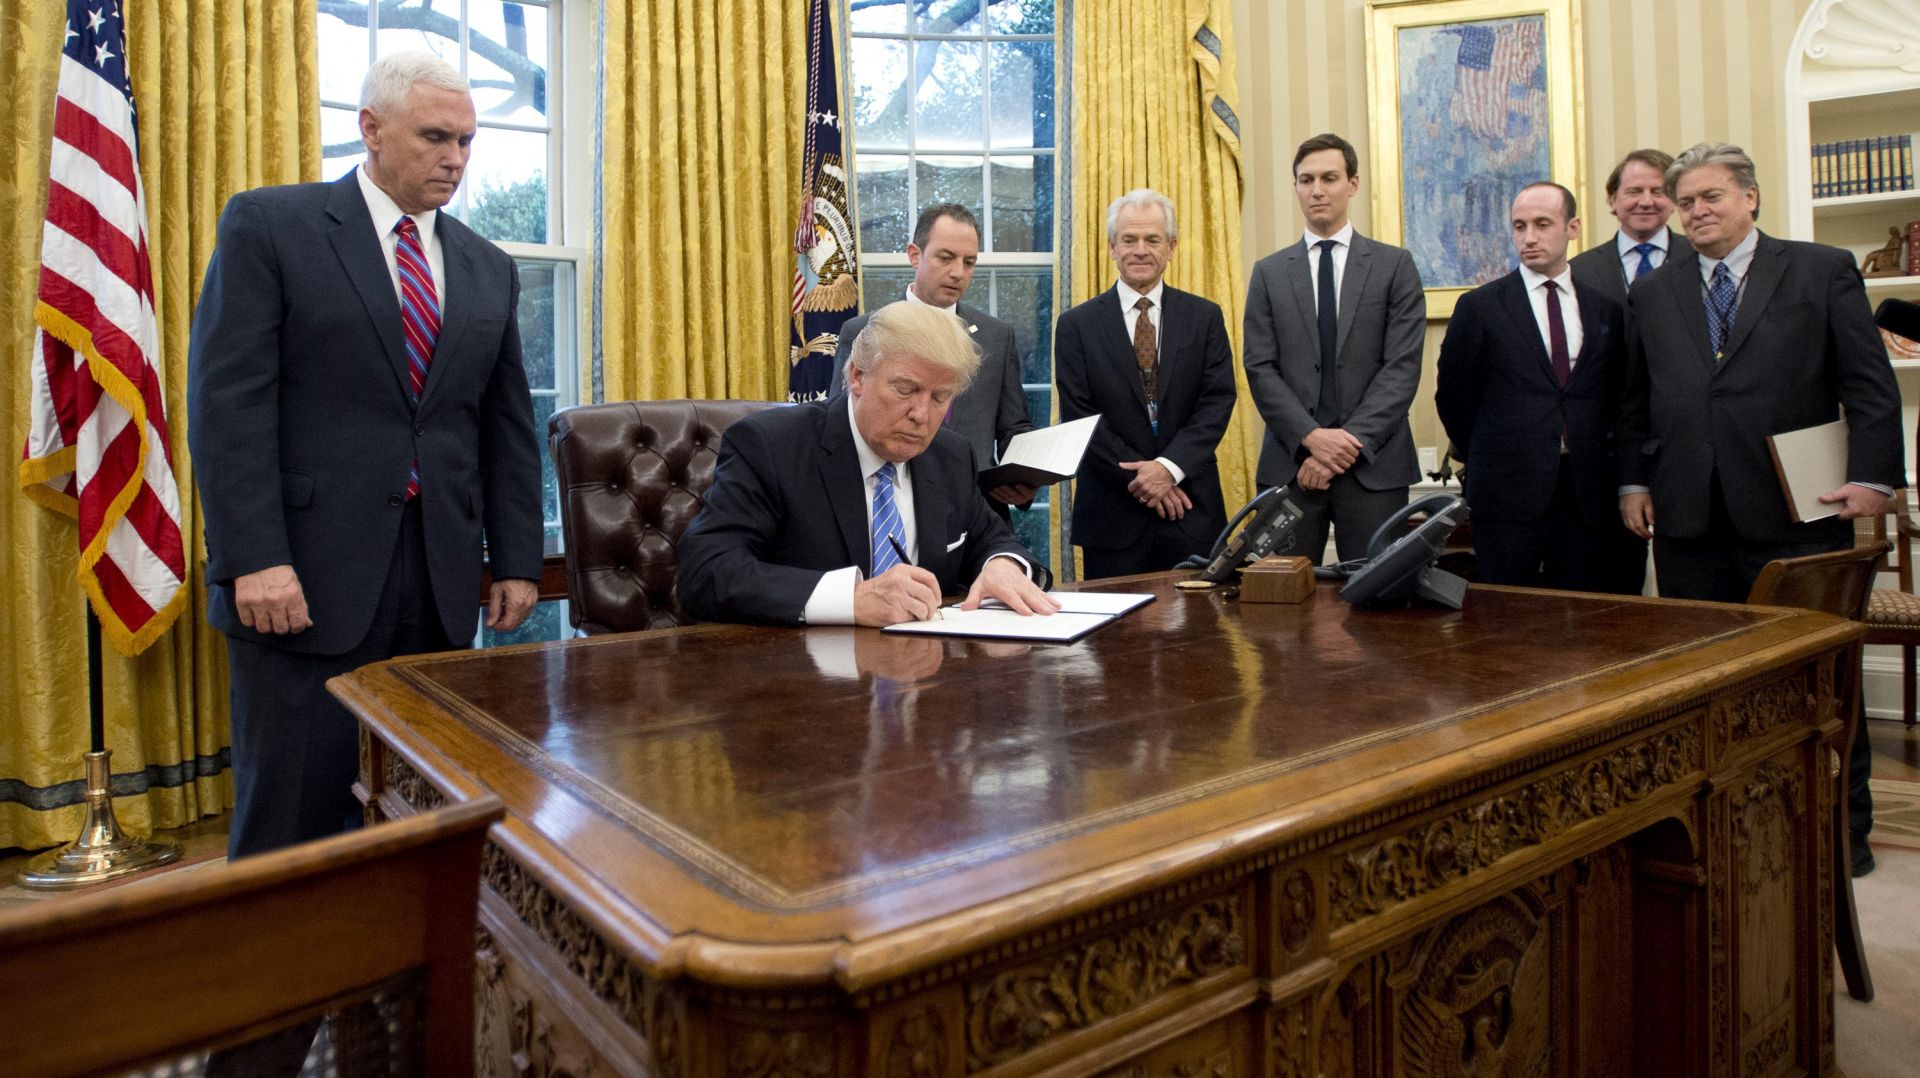 epa05744781 US President Donald J. Trump signs the first of three Executive Orders in the Oval Office of the White House in Washington, DC, USA, 23 January 2017. They concerned the withdrawal of the United States from the Trans-Pacific Partnership (TPP), a US Government hiring freeze for all departments but the military, and "Mexico City" which bans federal funding of abortions overseas. Standing behind the President, from left to right: US Vice President Mike Pence; White House Chief of Staff Reince Preibus; Peter Navarro, Director of the National Trade Council; Jared Kushner, Senior Advisor to the President; Steven Miller, Senior Advisor to the President; unknown; and Steve Bannon, White House Chief Strategist.  EPA/Ron Sachs / POOL